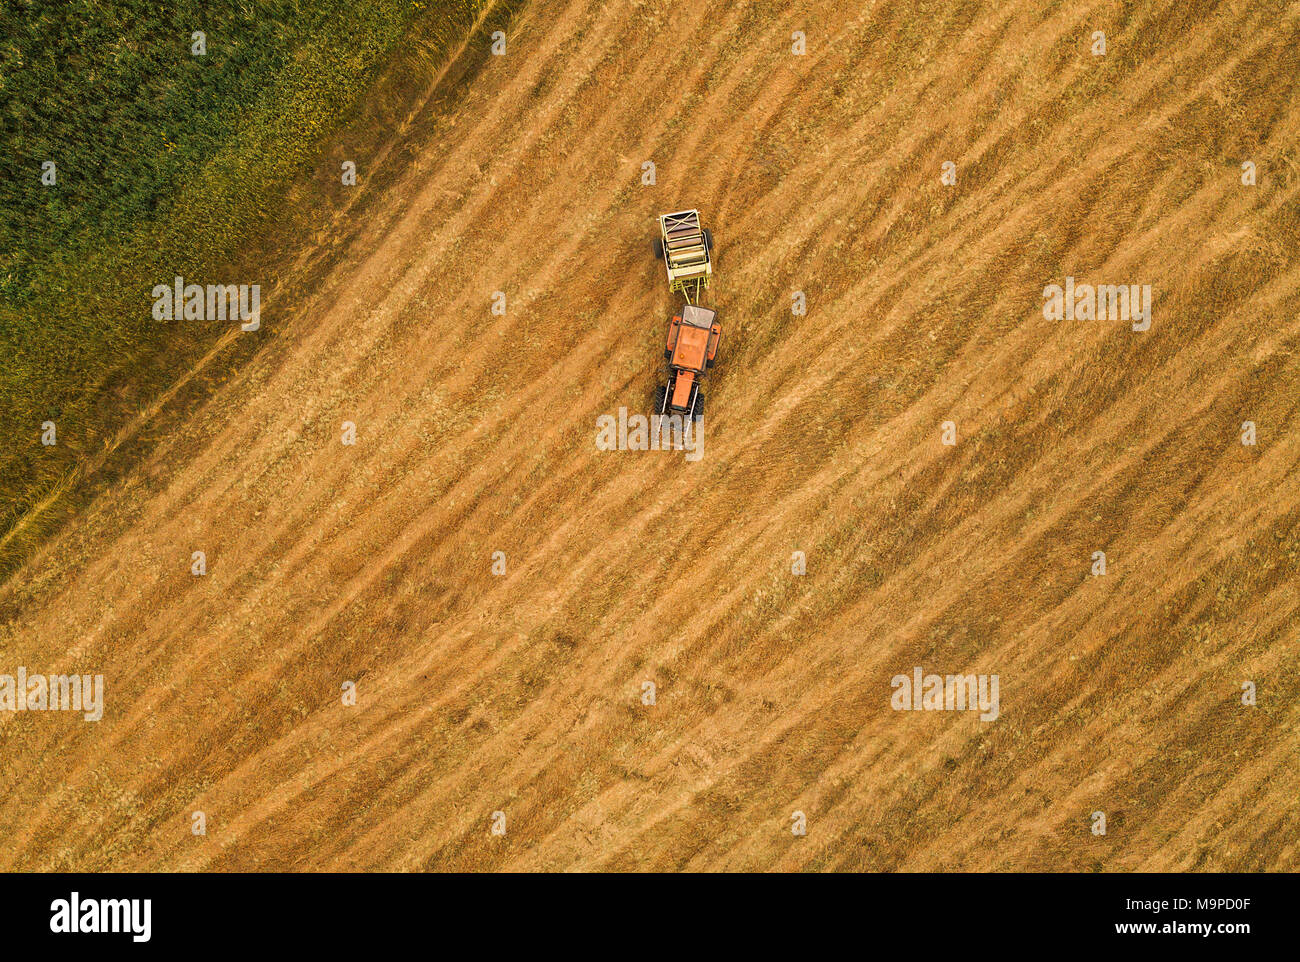 Aerial view of tractor making hay bale rolls in field after wheat harvest, drone pov Stock Photo